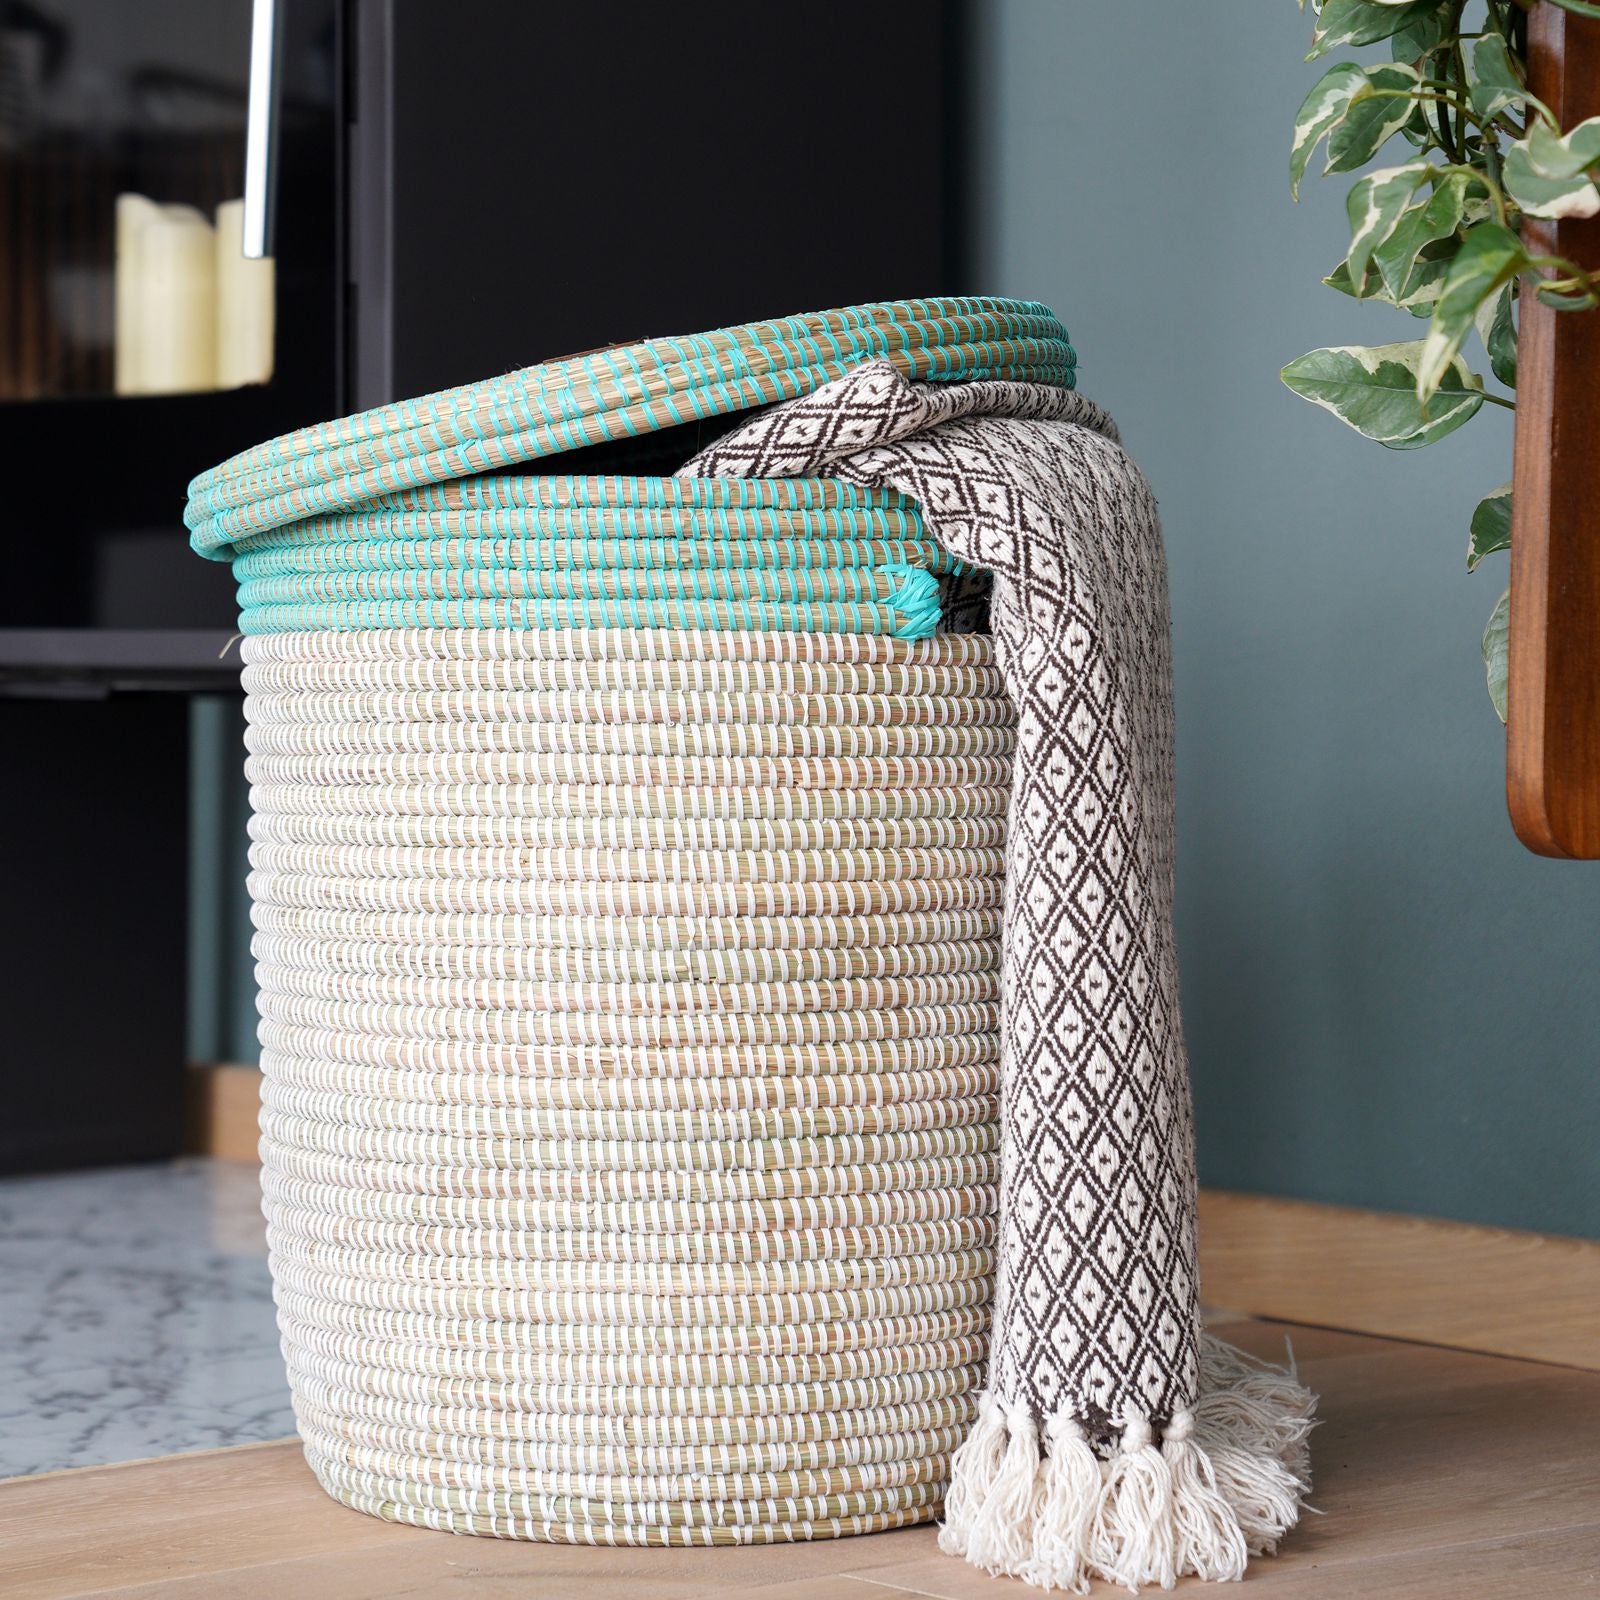 Set: African laundry baskets with lid – turquoise